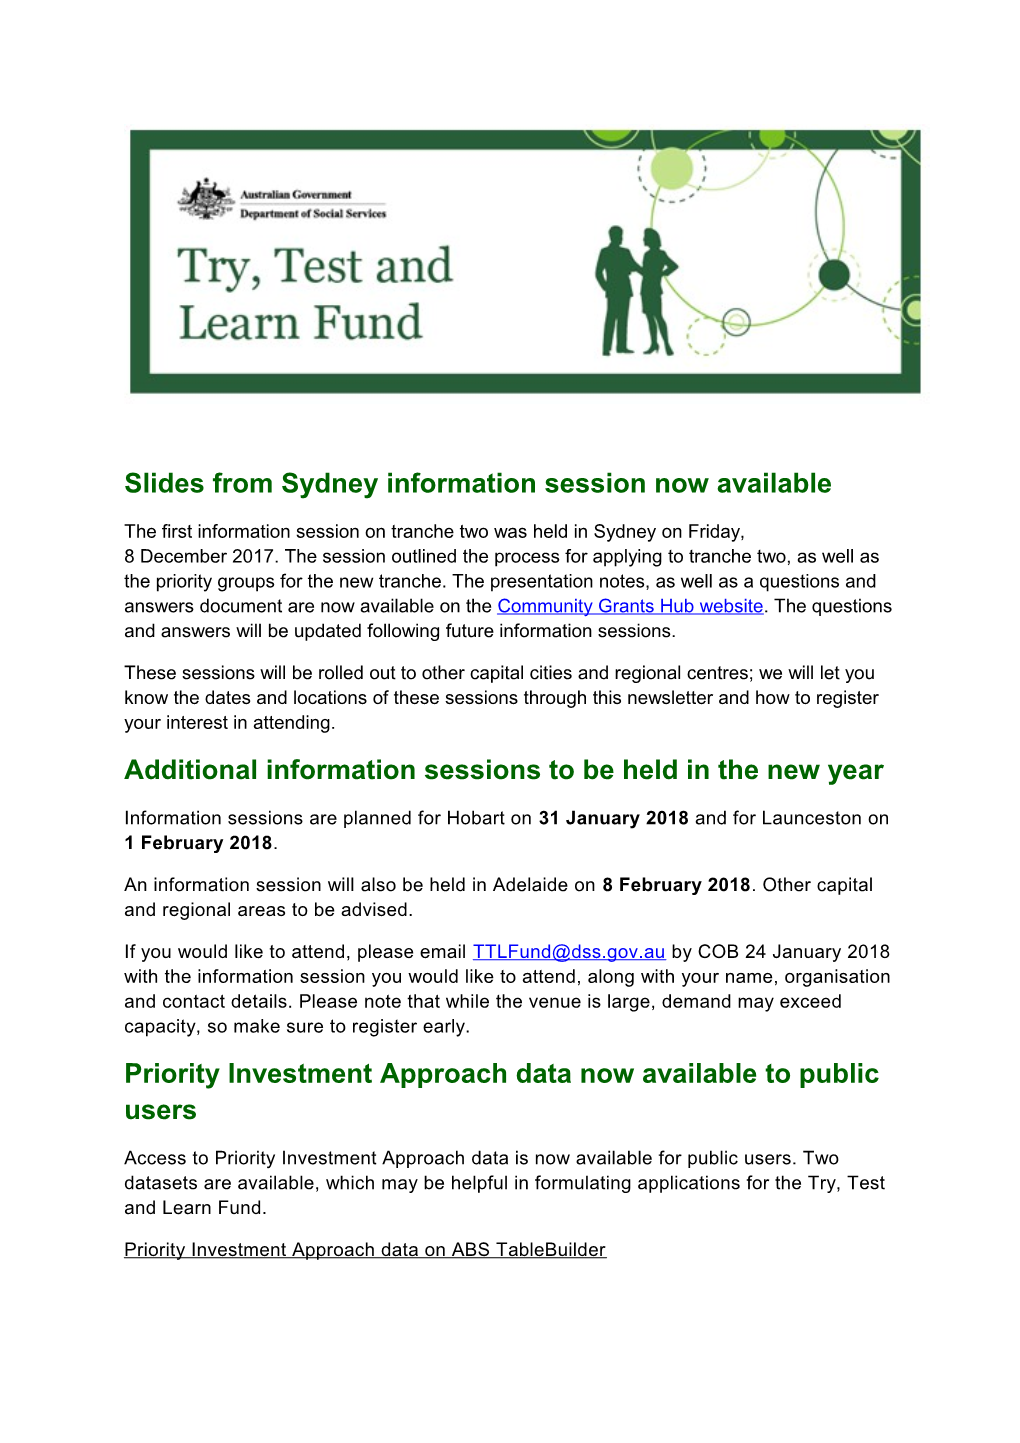 Slides from Sydney Information Session Now Available